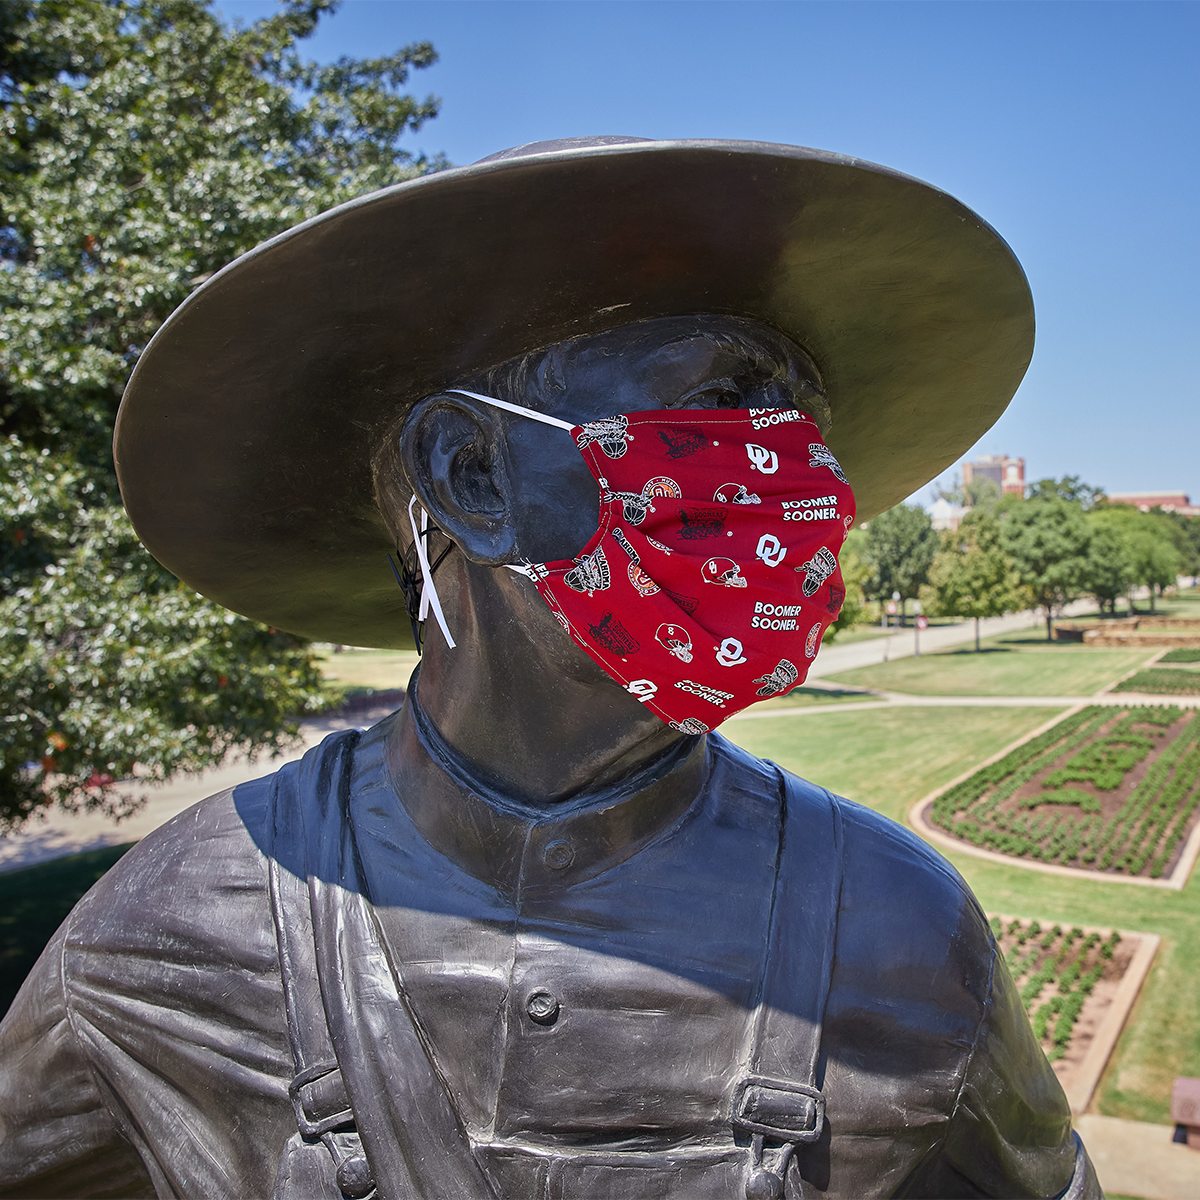 OU Seed Sower wearing a cloth mask